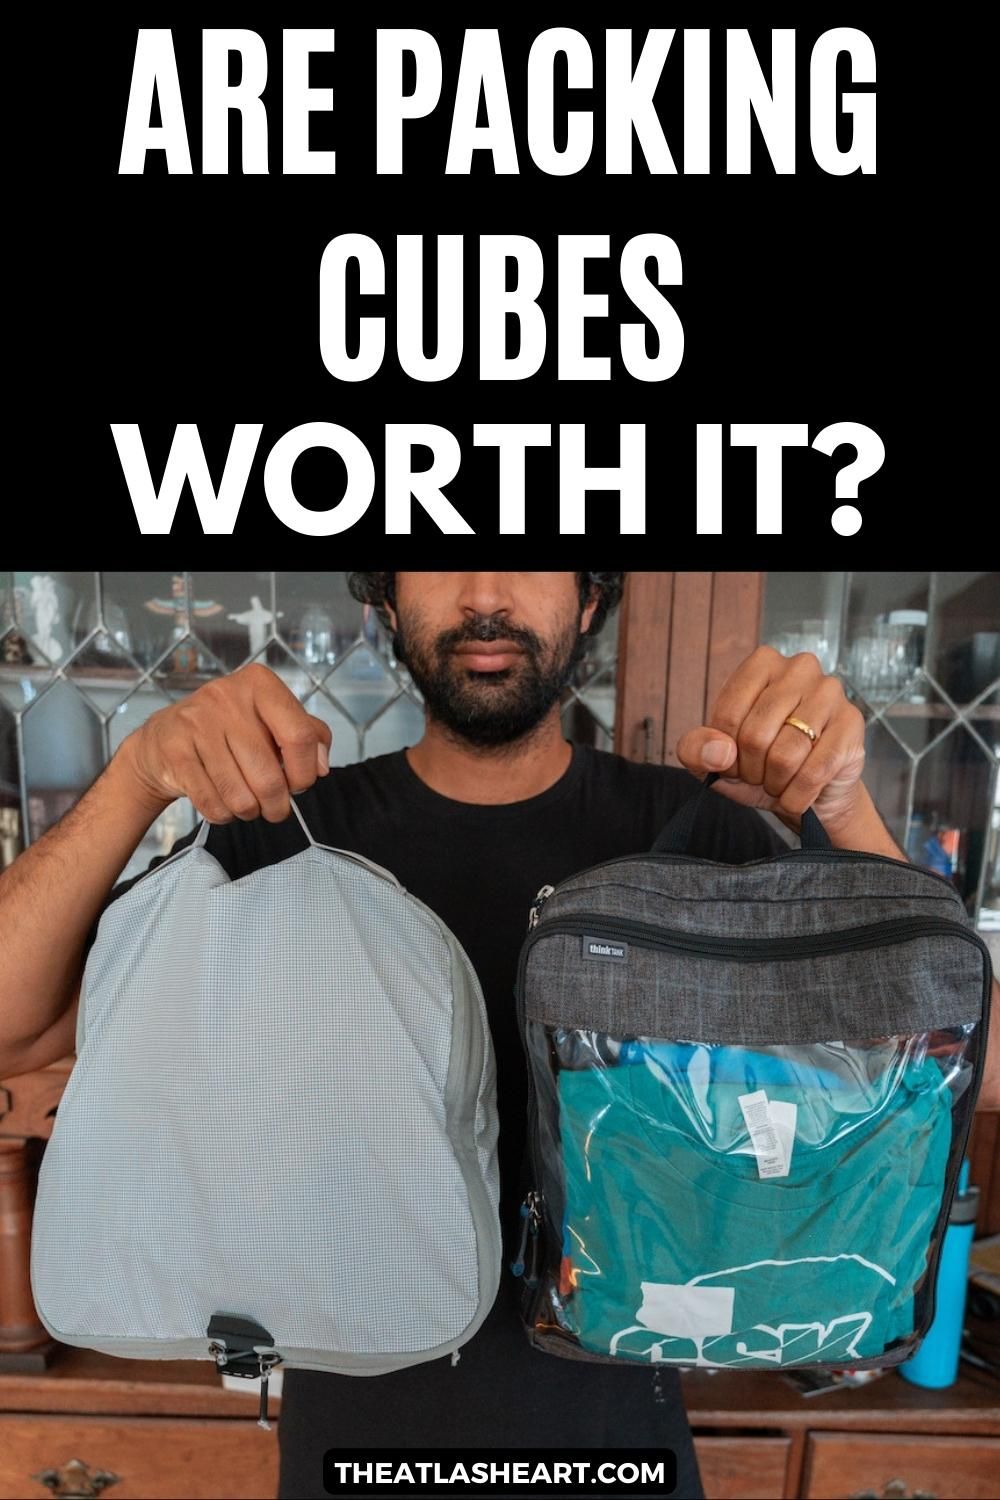 A picture of a man taken at chest level as he holds up two different styles of packing cubes with a wooden cabinet behind him, with the text overlay, "Are Packing Cubes Worth It?"